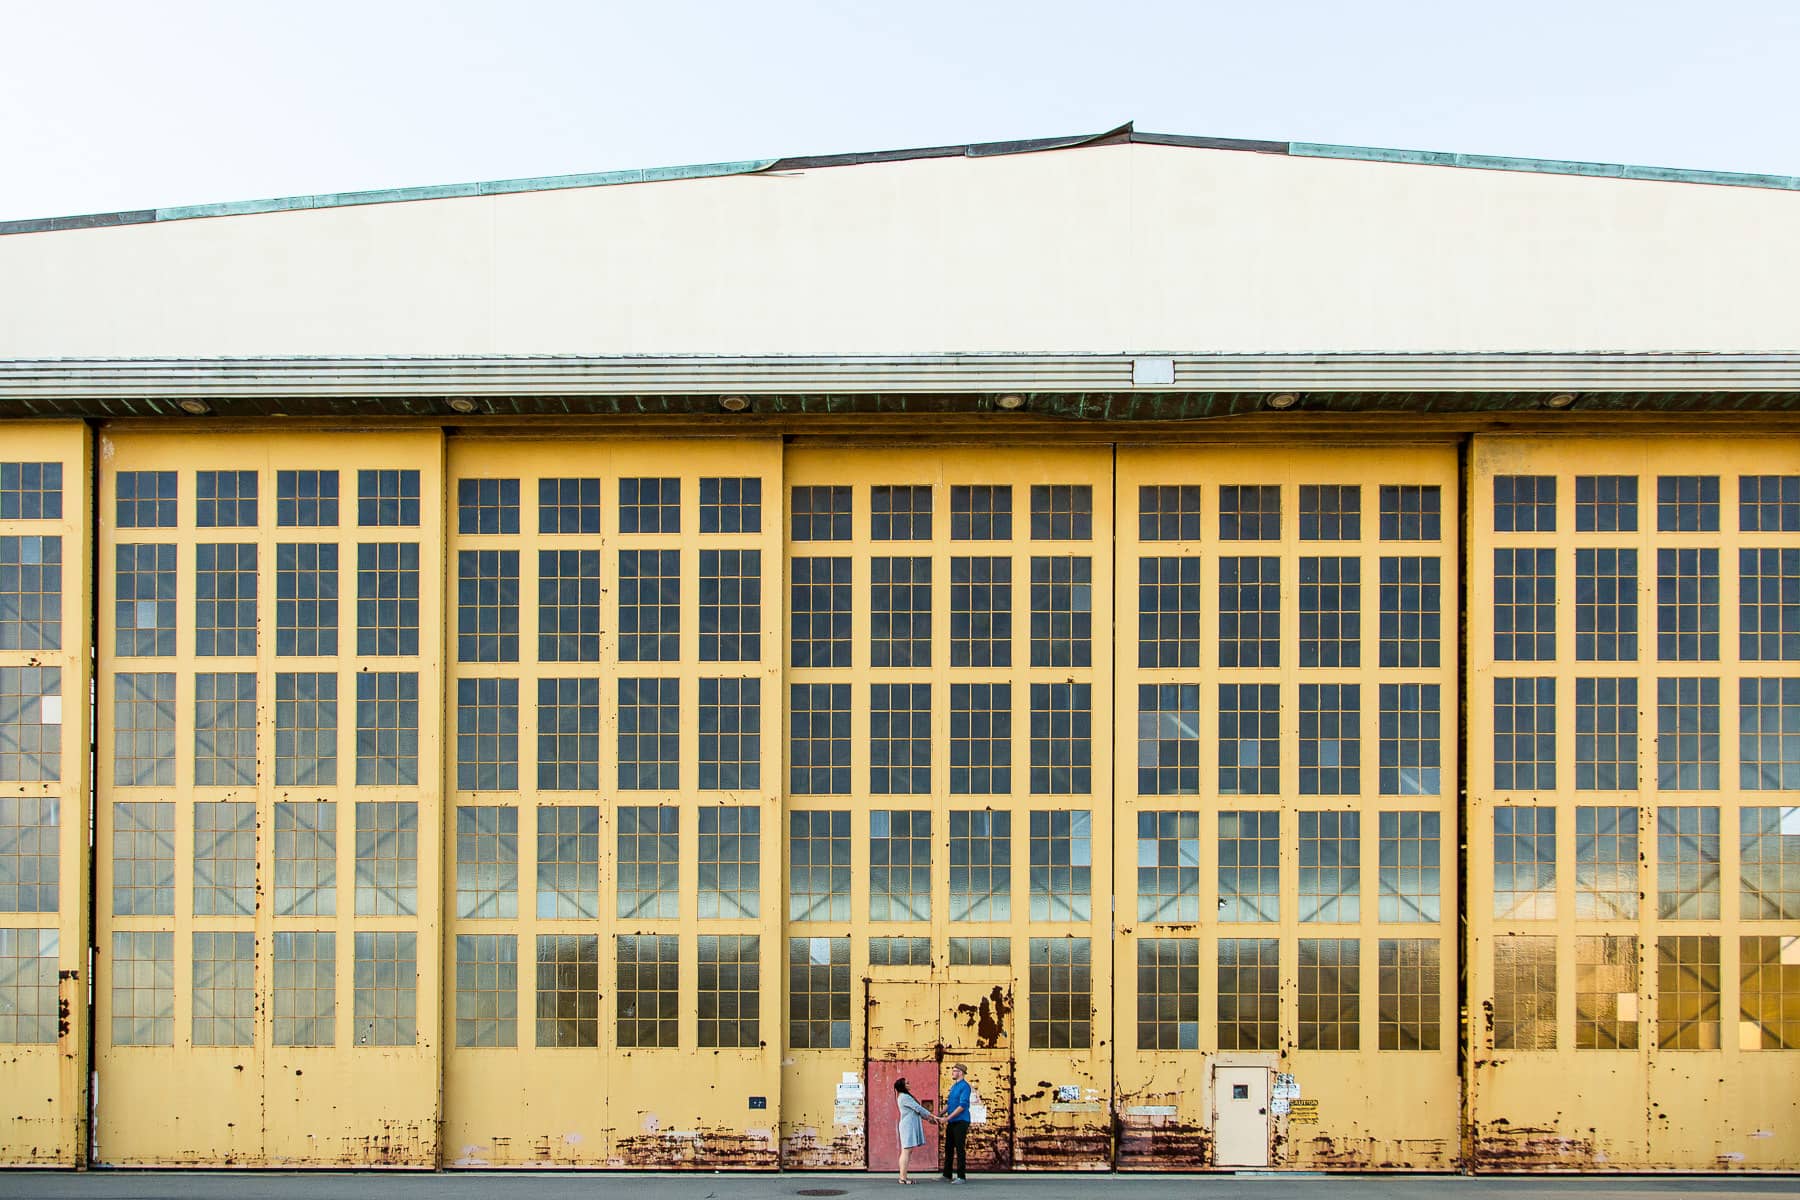 Two people stand in front of Giant yellow windowed warehouse walls